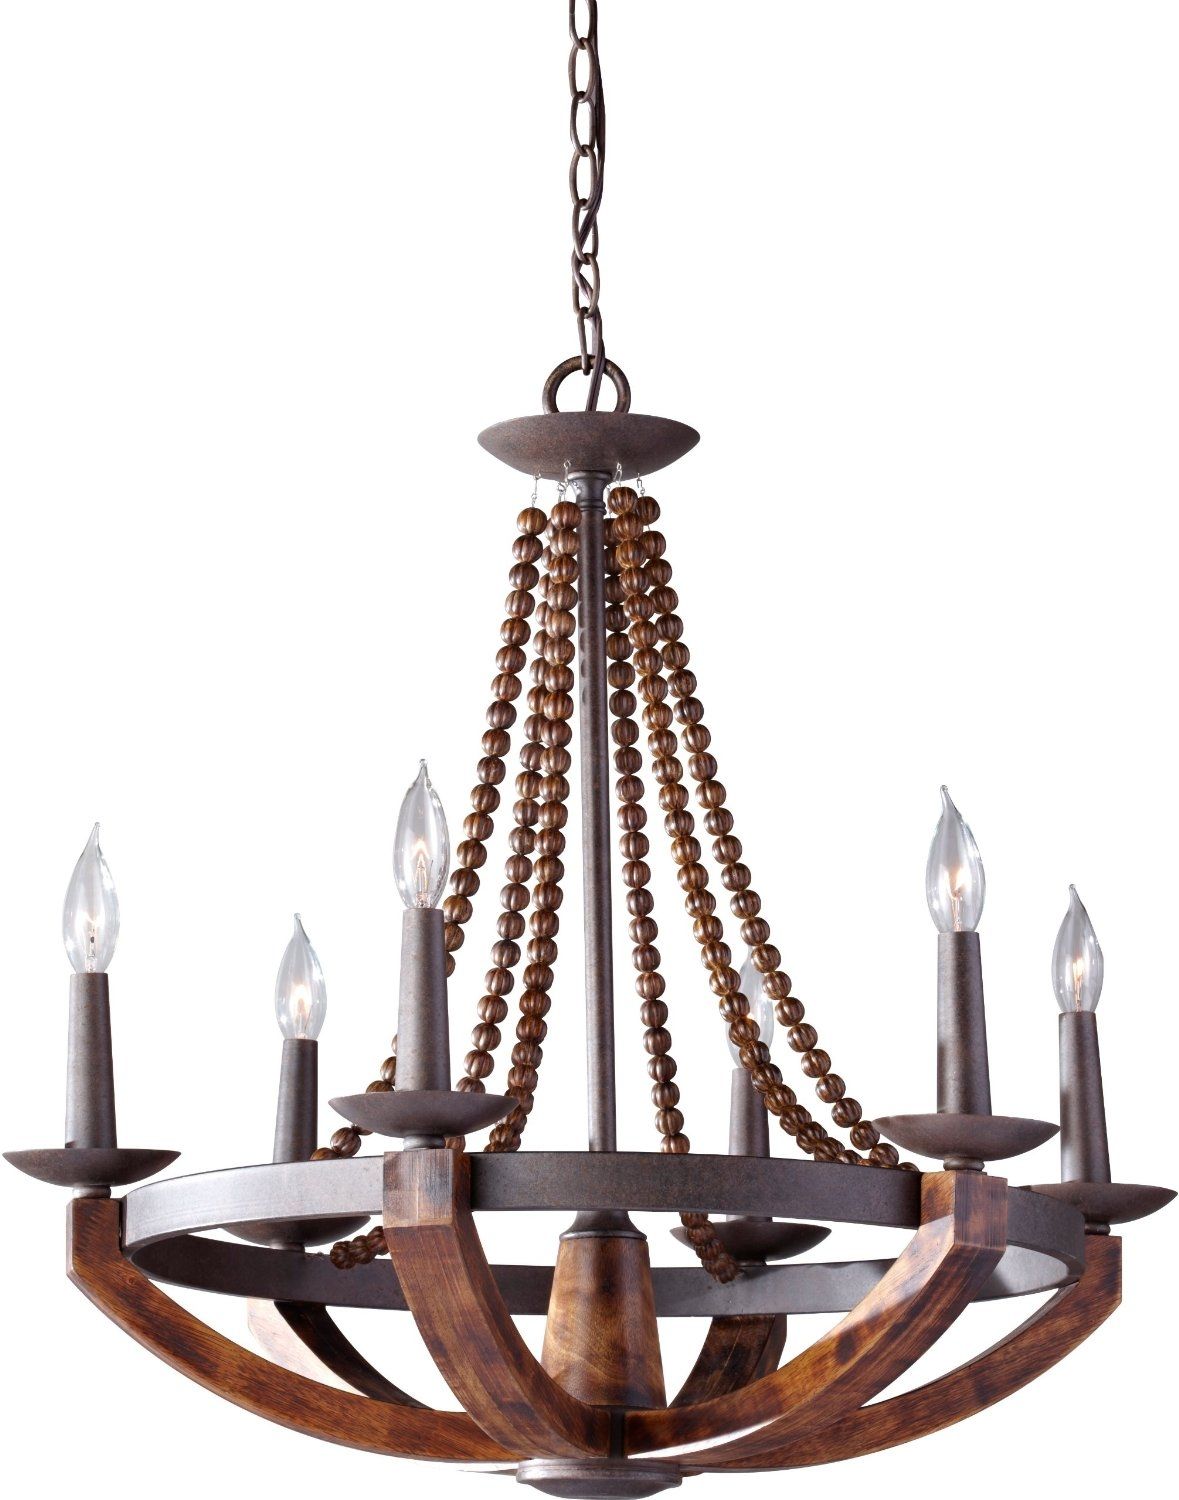 12 Best Rustic Wood And Metal Chandeliers Qosy Throughout Wooden Chandeliers (View 5 of 12)